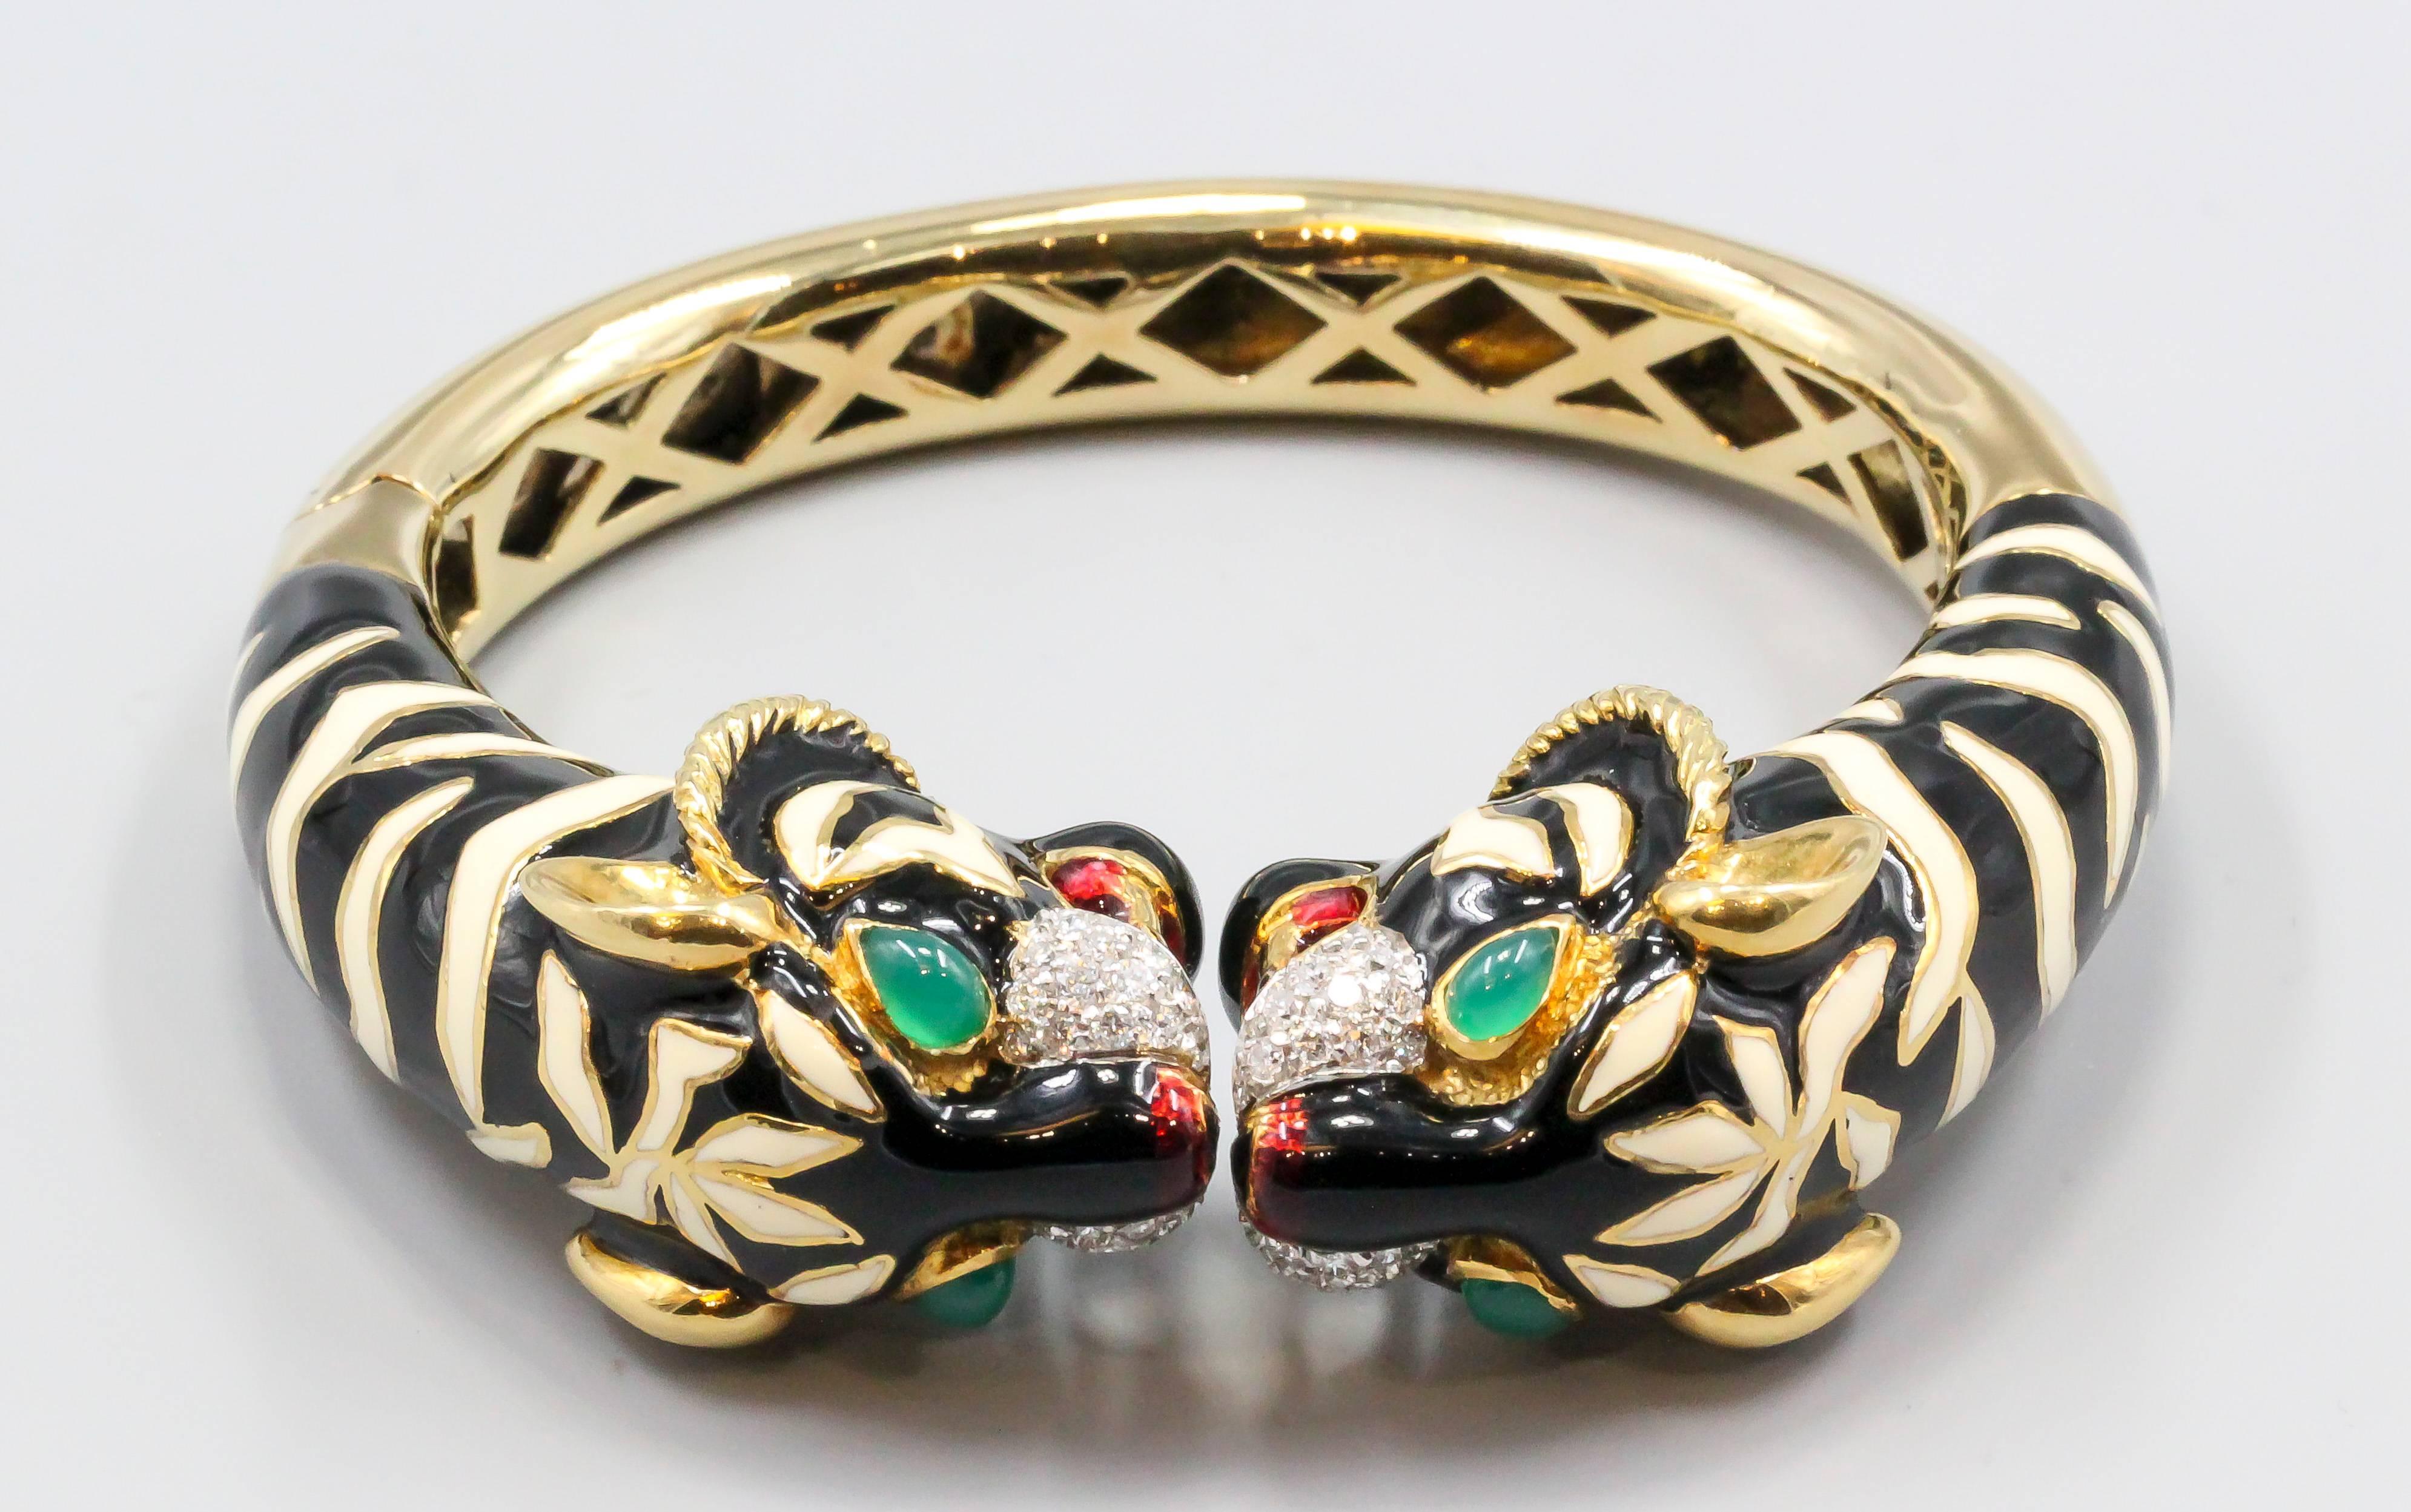 Impressive diamond, emerald, enamel and 18K yellow gold cuff bracelet of Italian origin. It features two tiger heads facing each other with black and white enamel as the stripes on their bodies, as well as red enamel on the noses and inside their